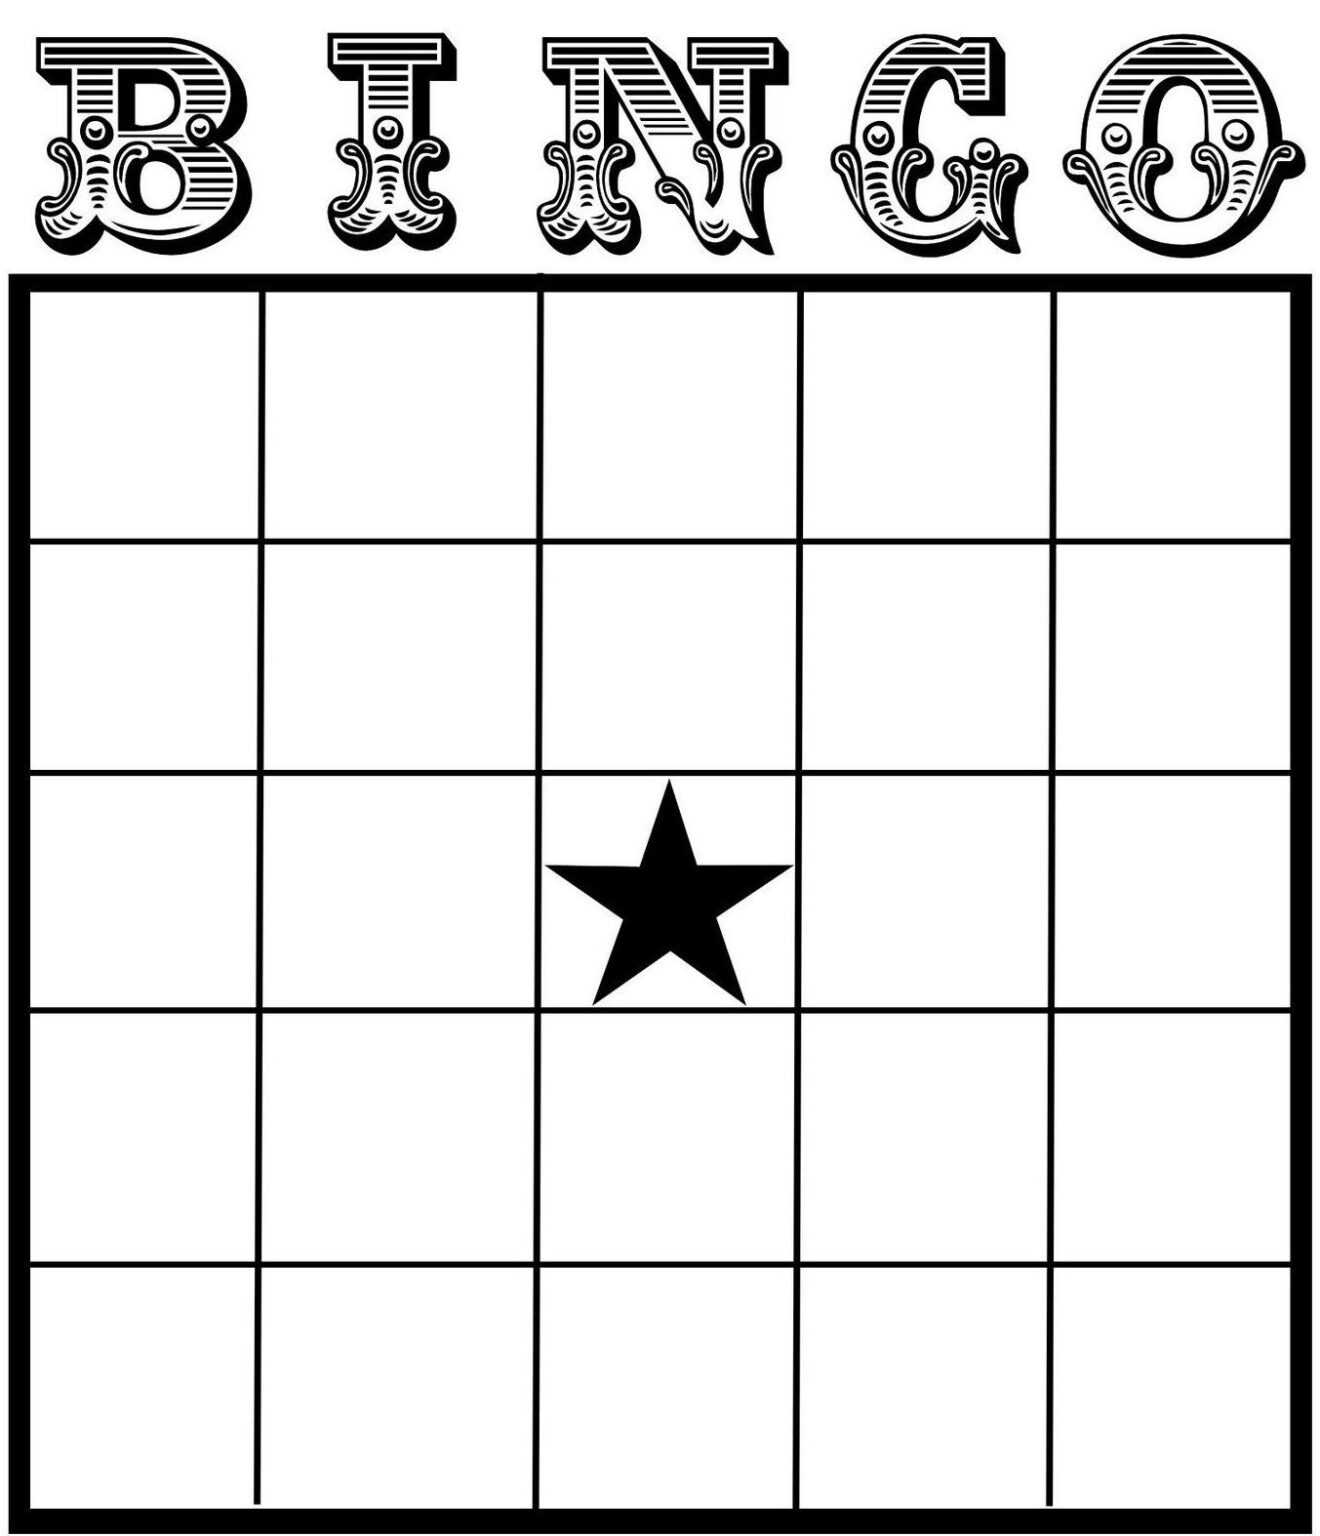 How To Fill In Blank Bingo Cards